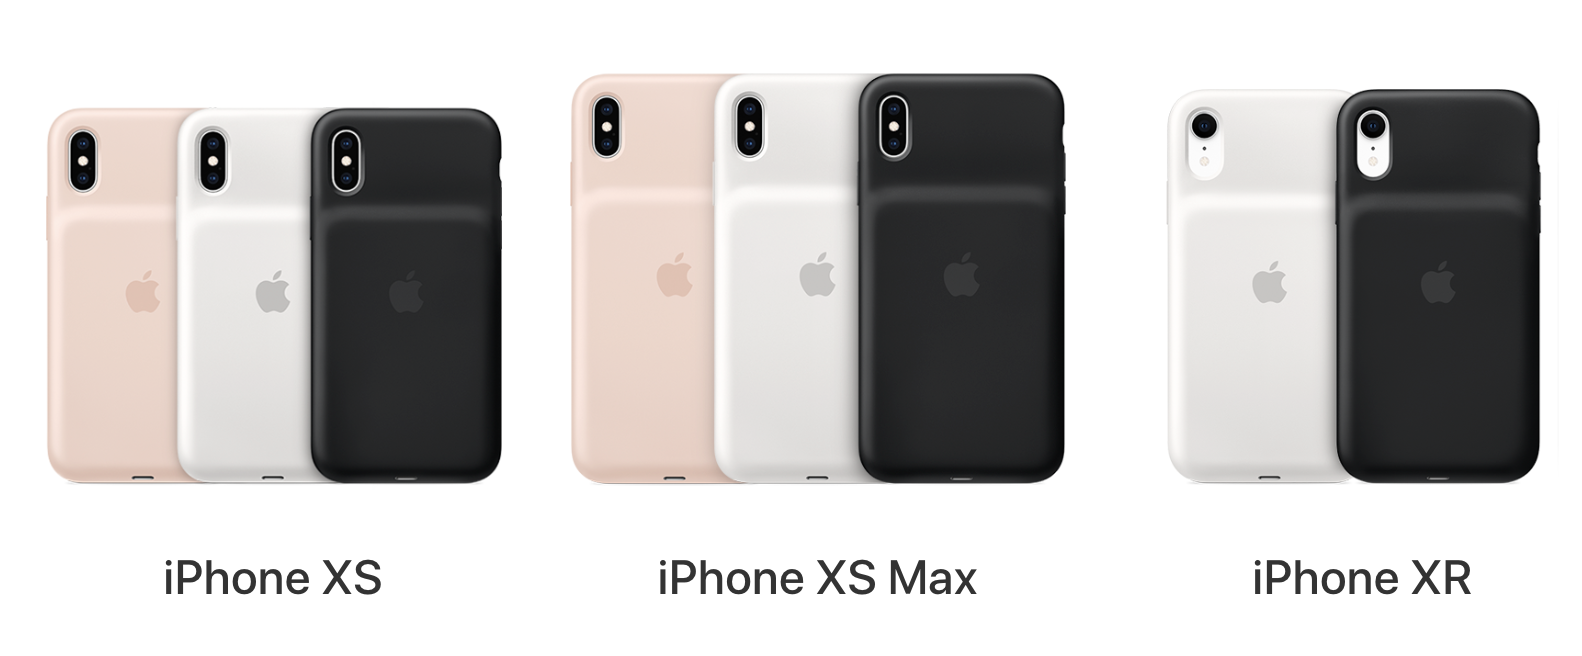 Apple、｢iPhone XS、iPhone XS Max、iPhone XR用Smart Battery Case交換プログラム｣を発表